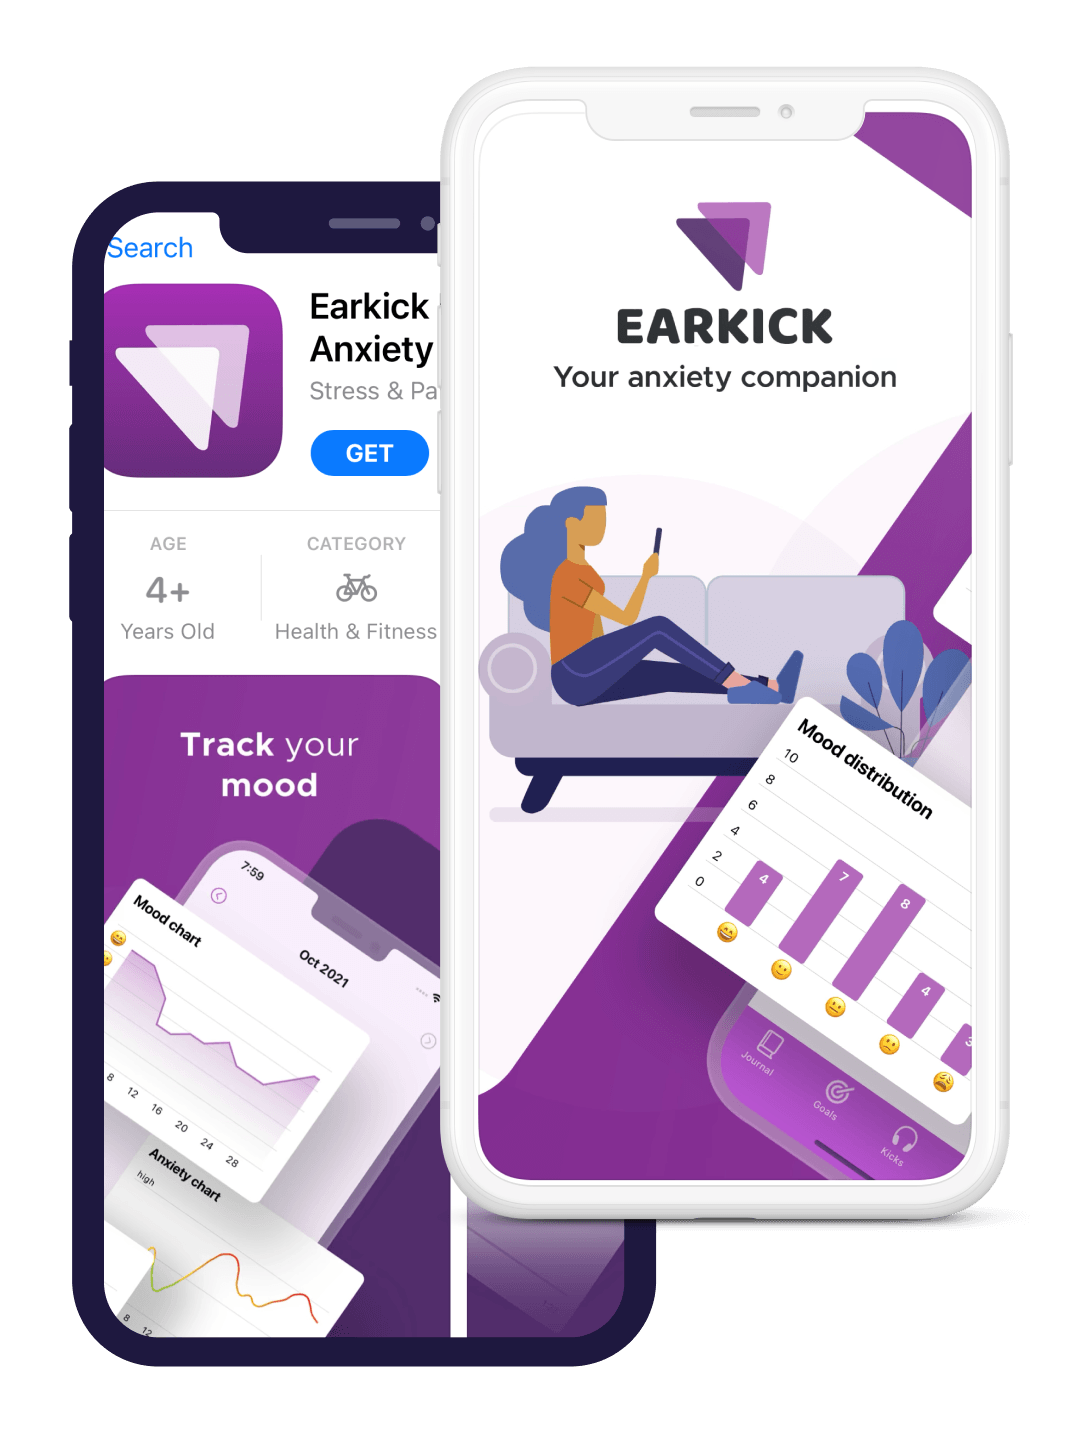 Earkick - how we launched and got mental health app featured on Apple App Store